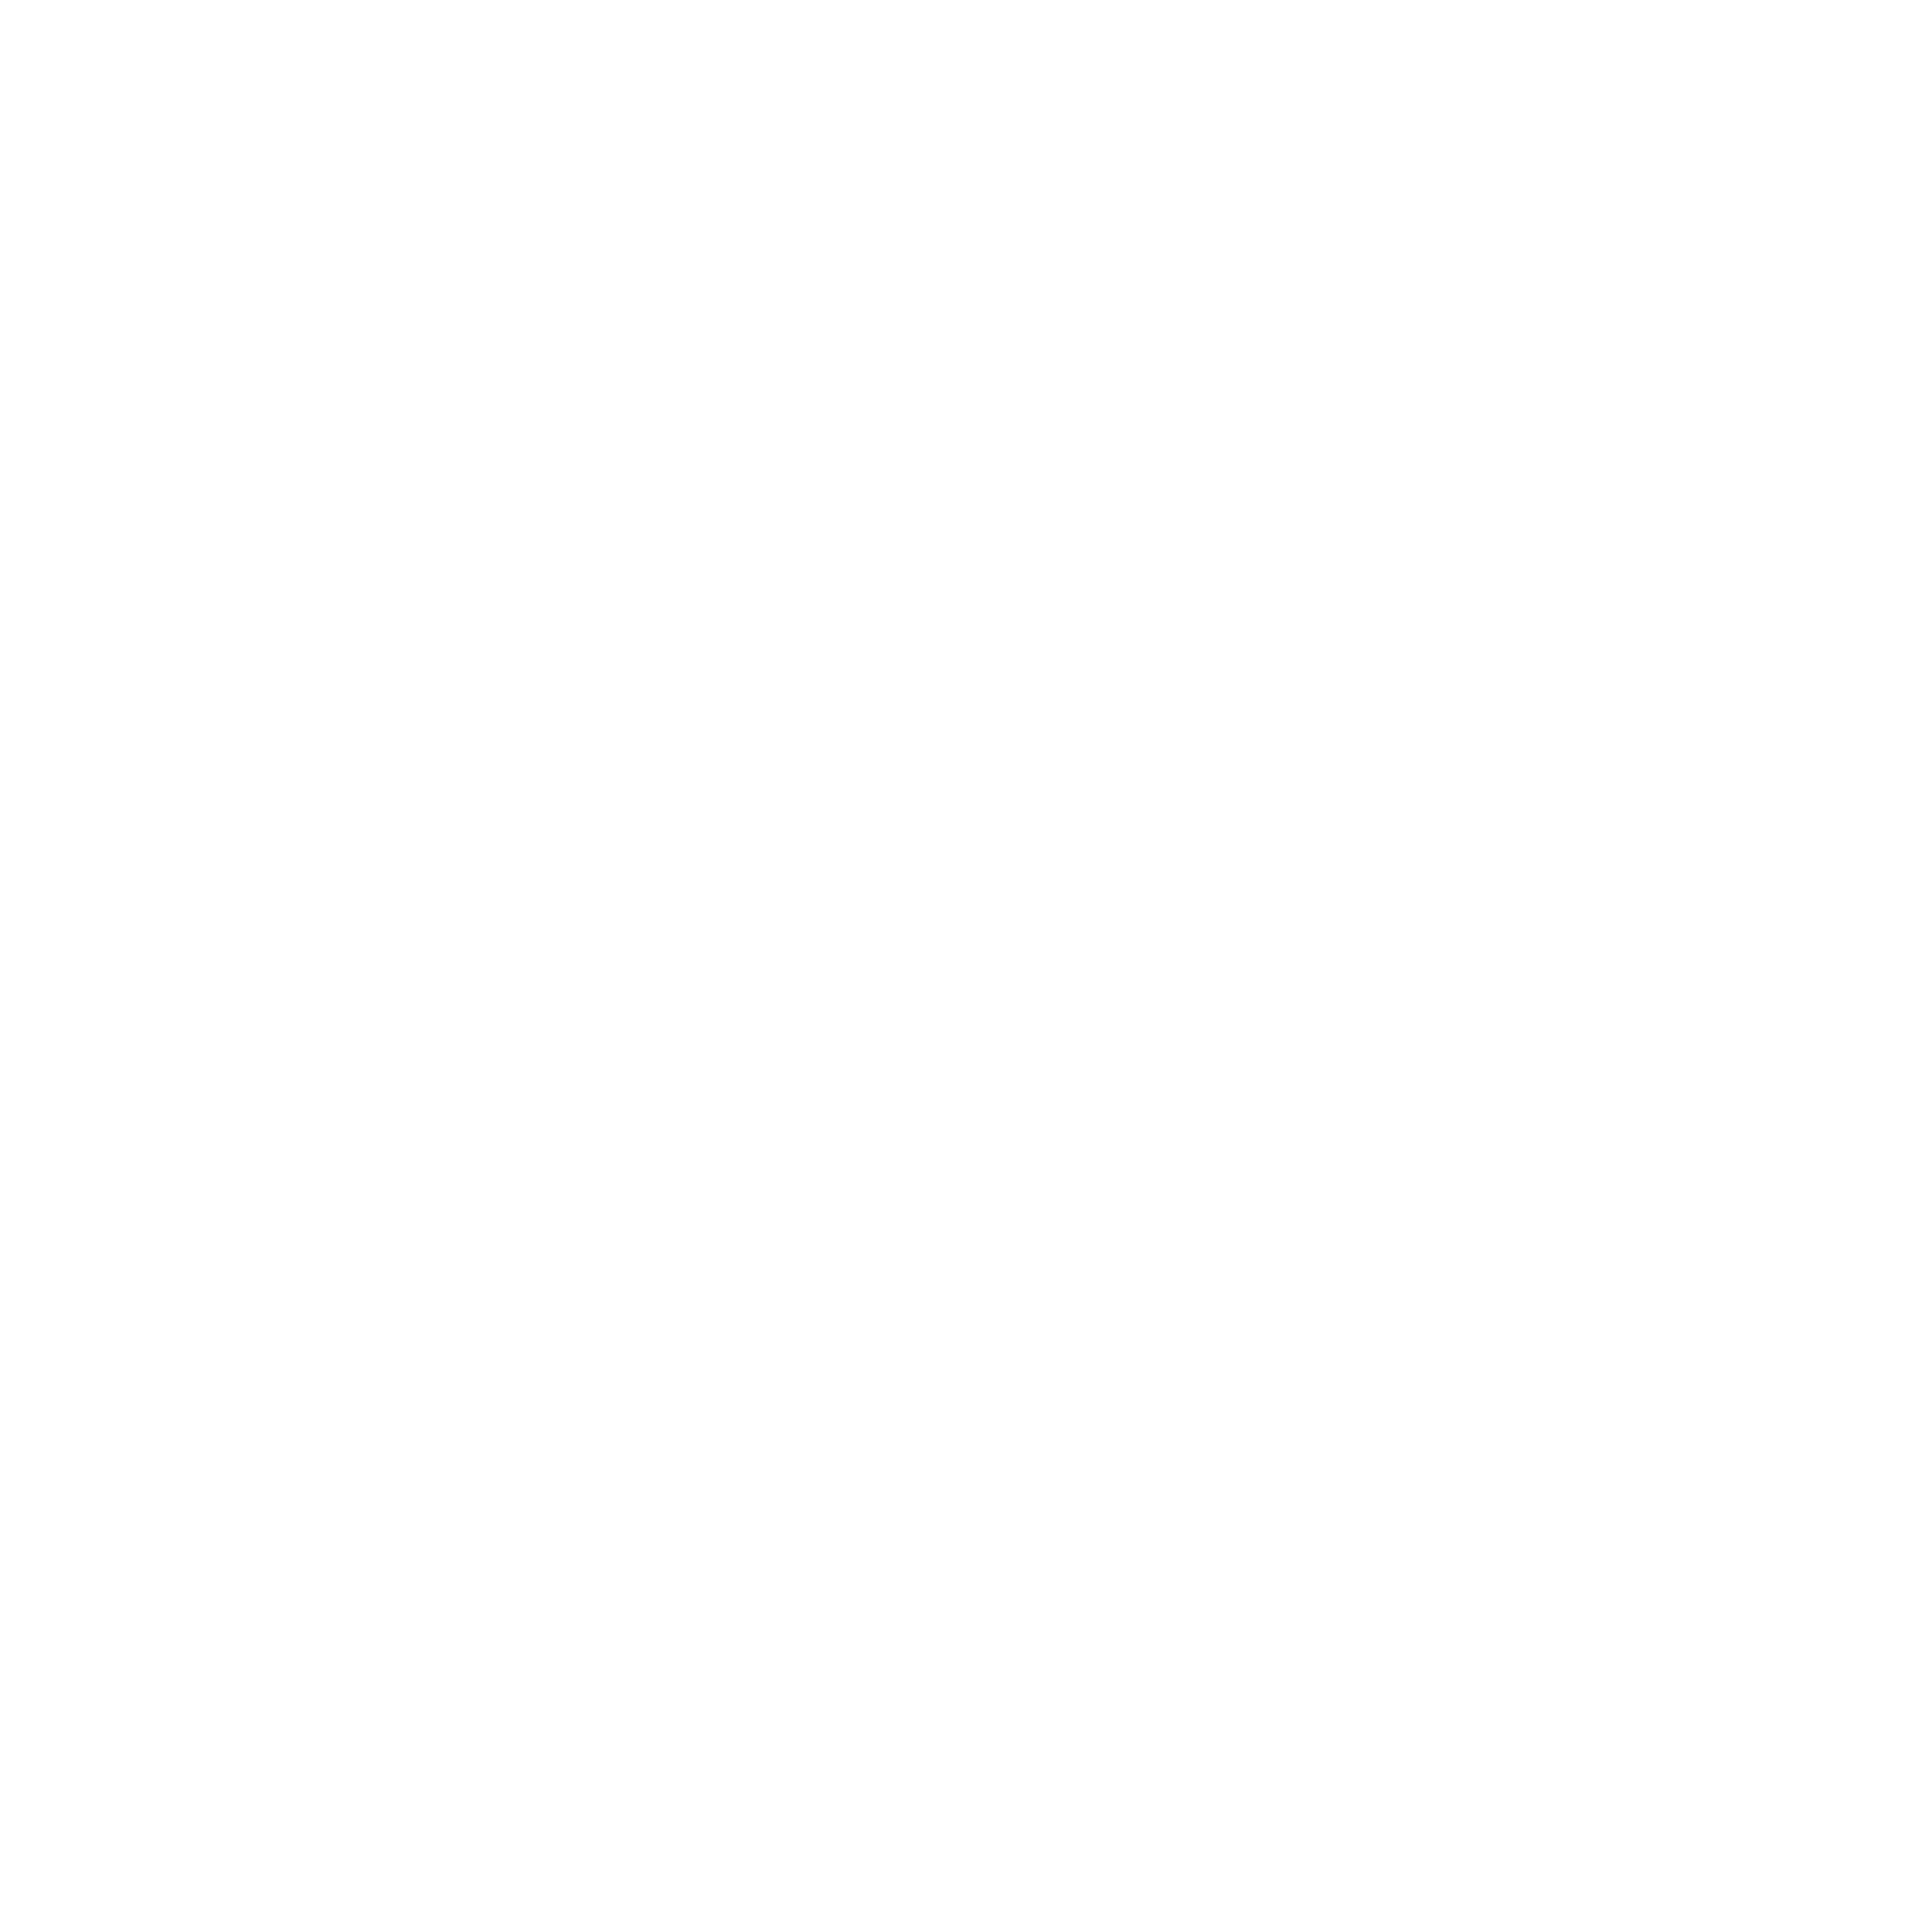 Real Estate For The Rest Of Us Podcast